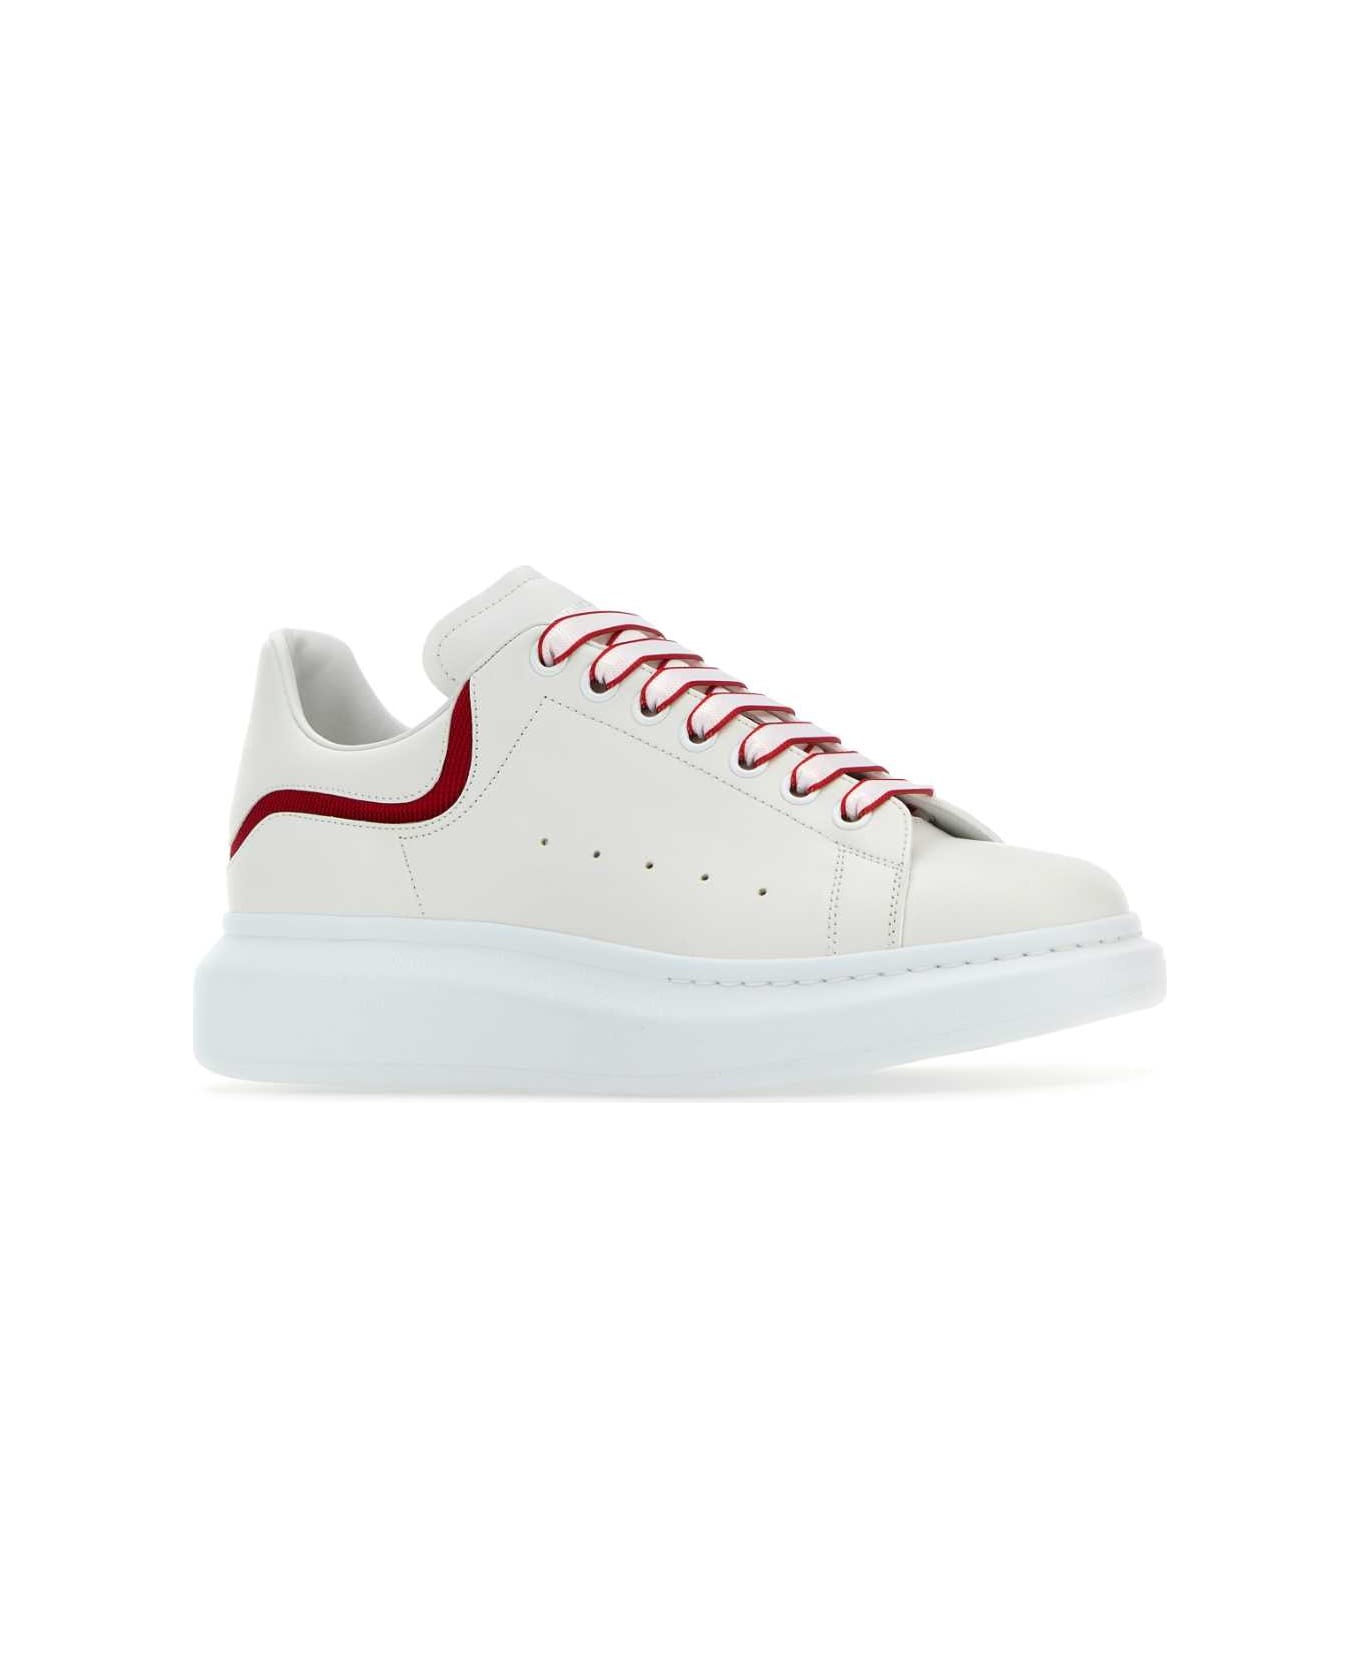 Alexander McQueen White Leather Sneakers With White Leather Heel - WHITERED スニーカー